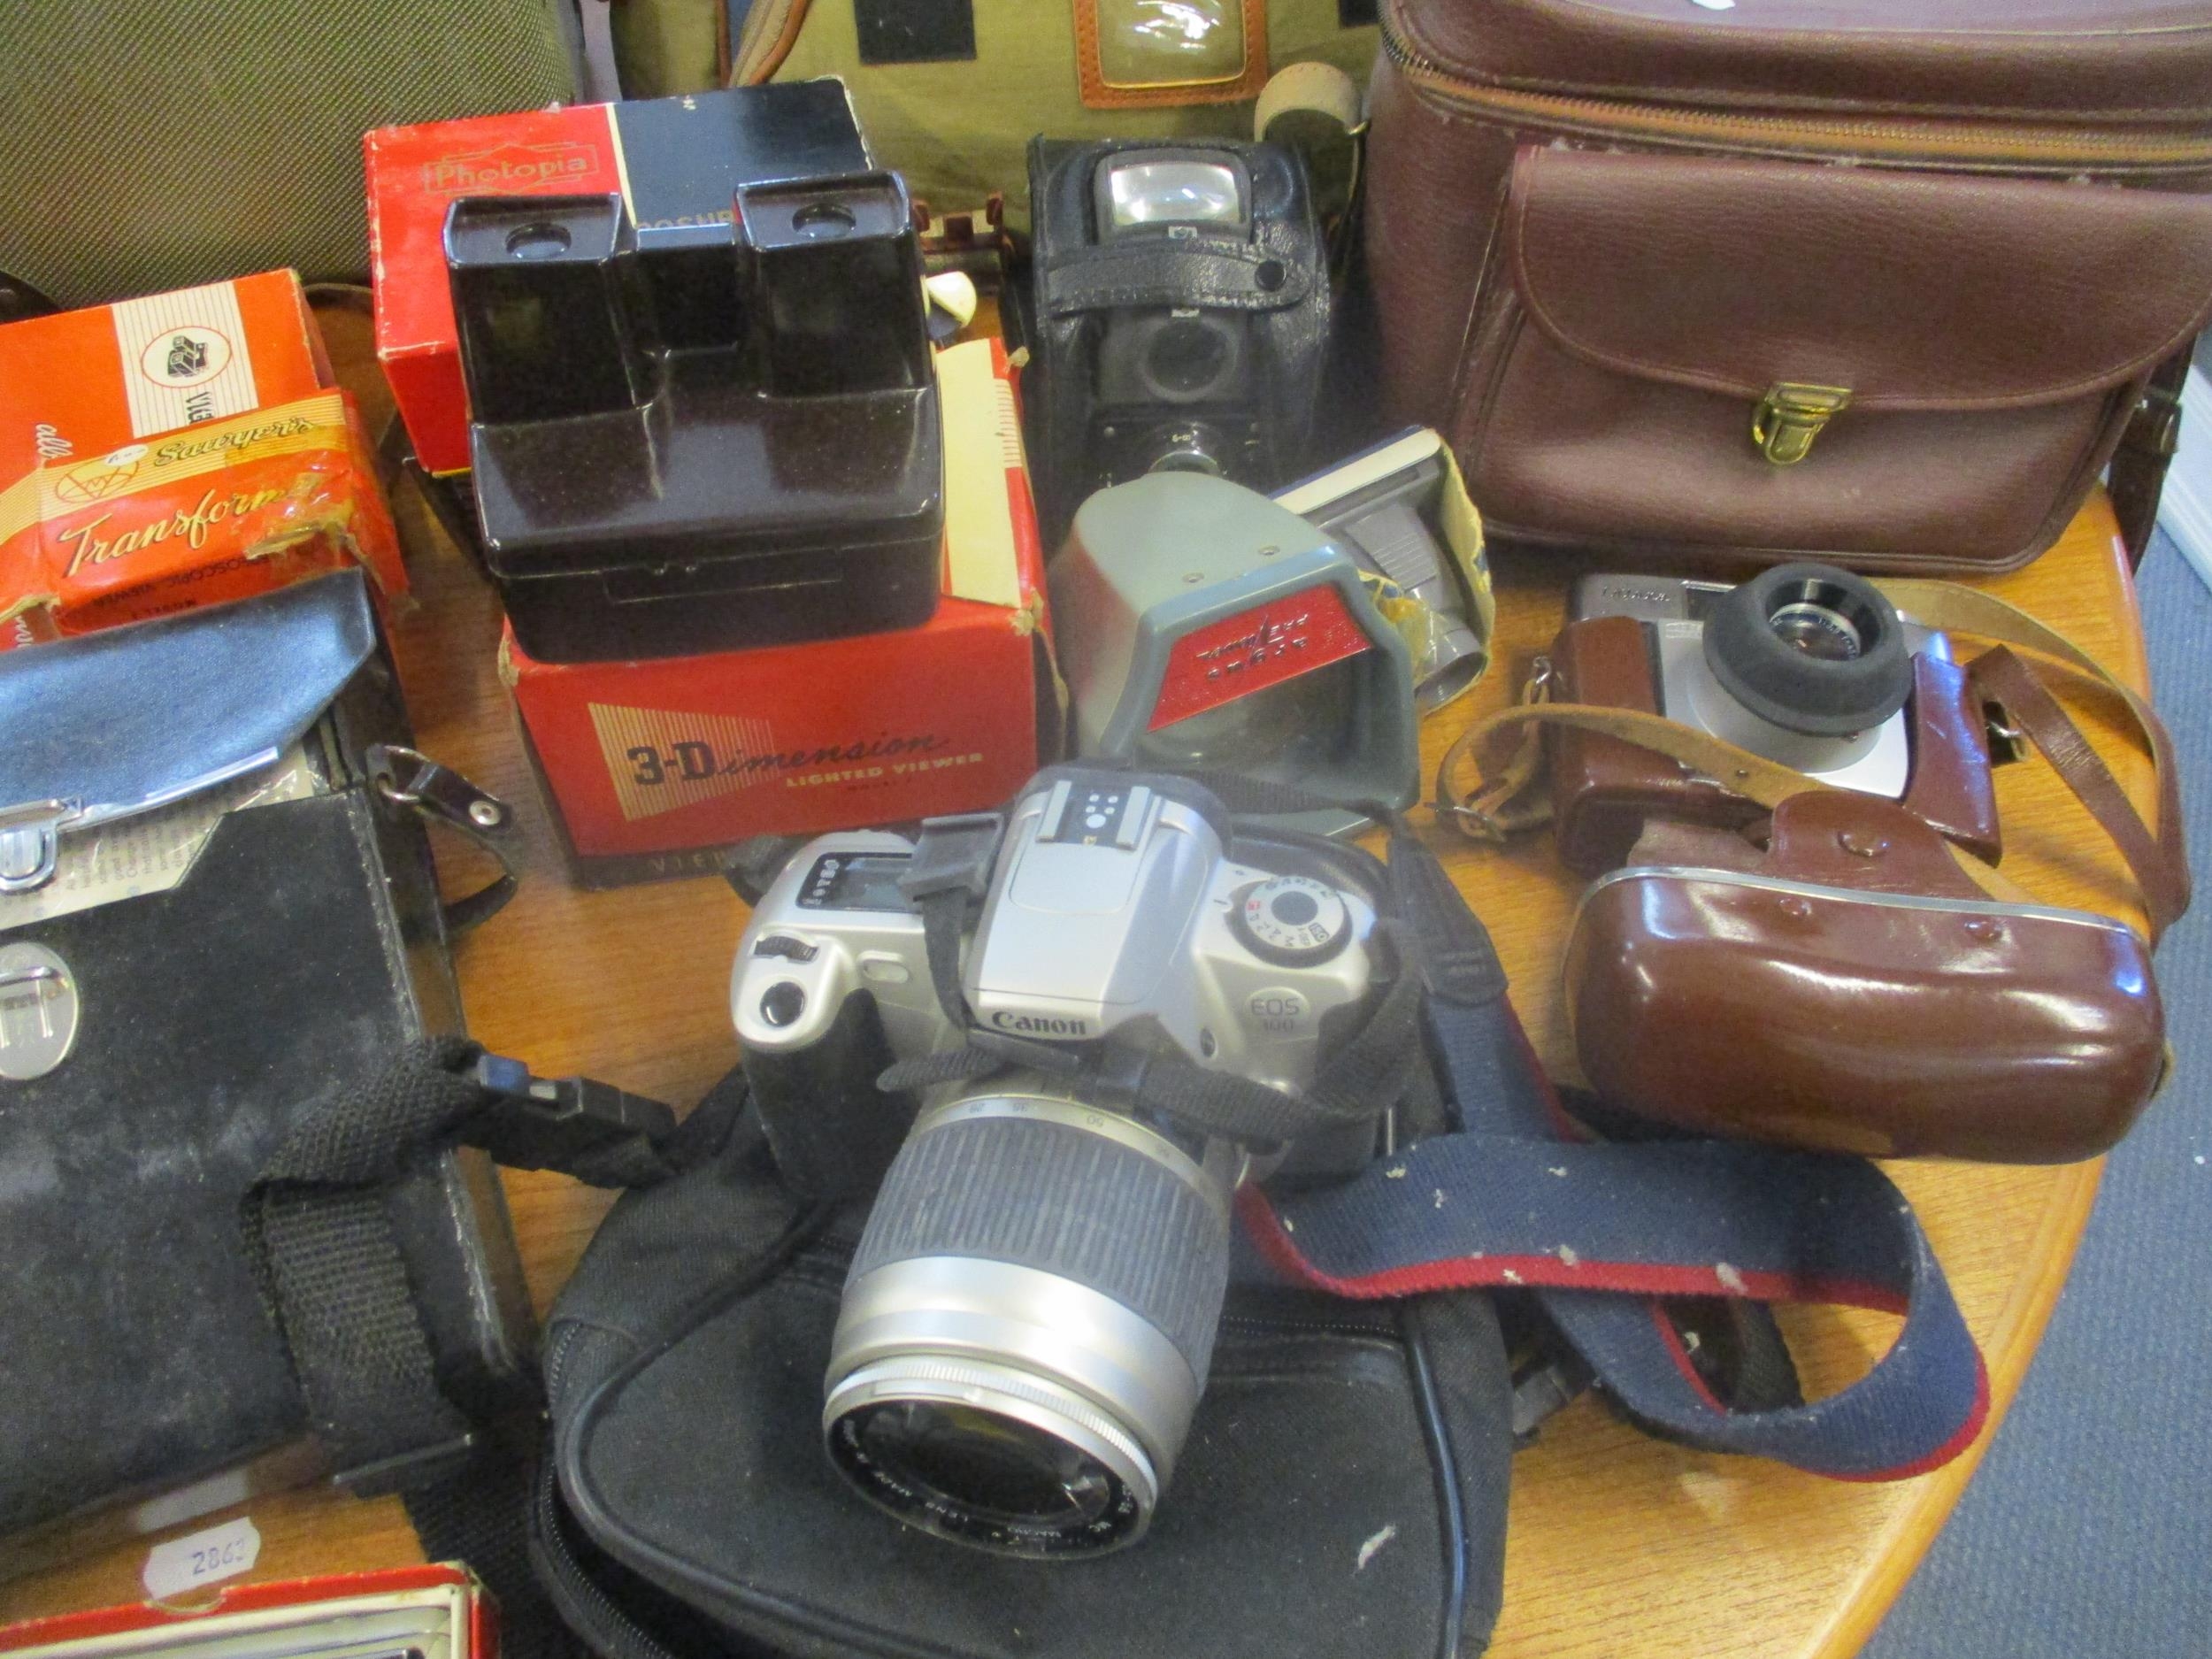 A mixed lot of film cameras and accessories, 3-D Viewmaster, projectors, and other items to - Image 3 of 4